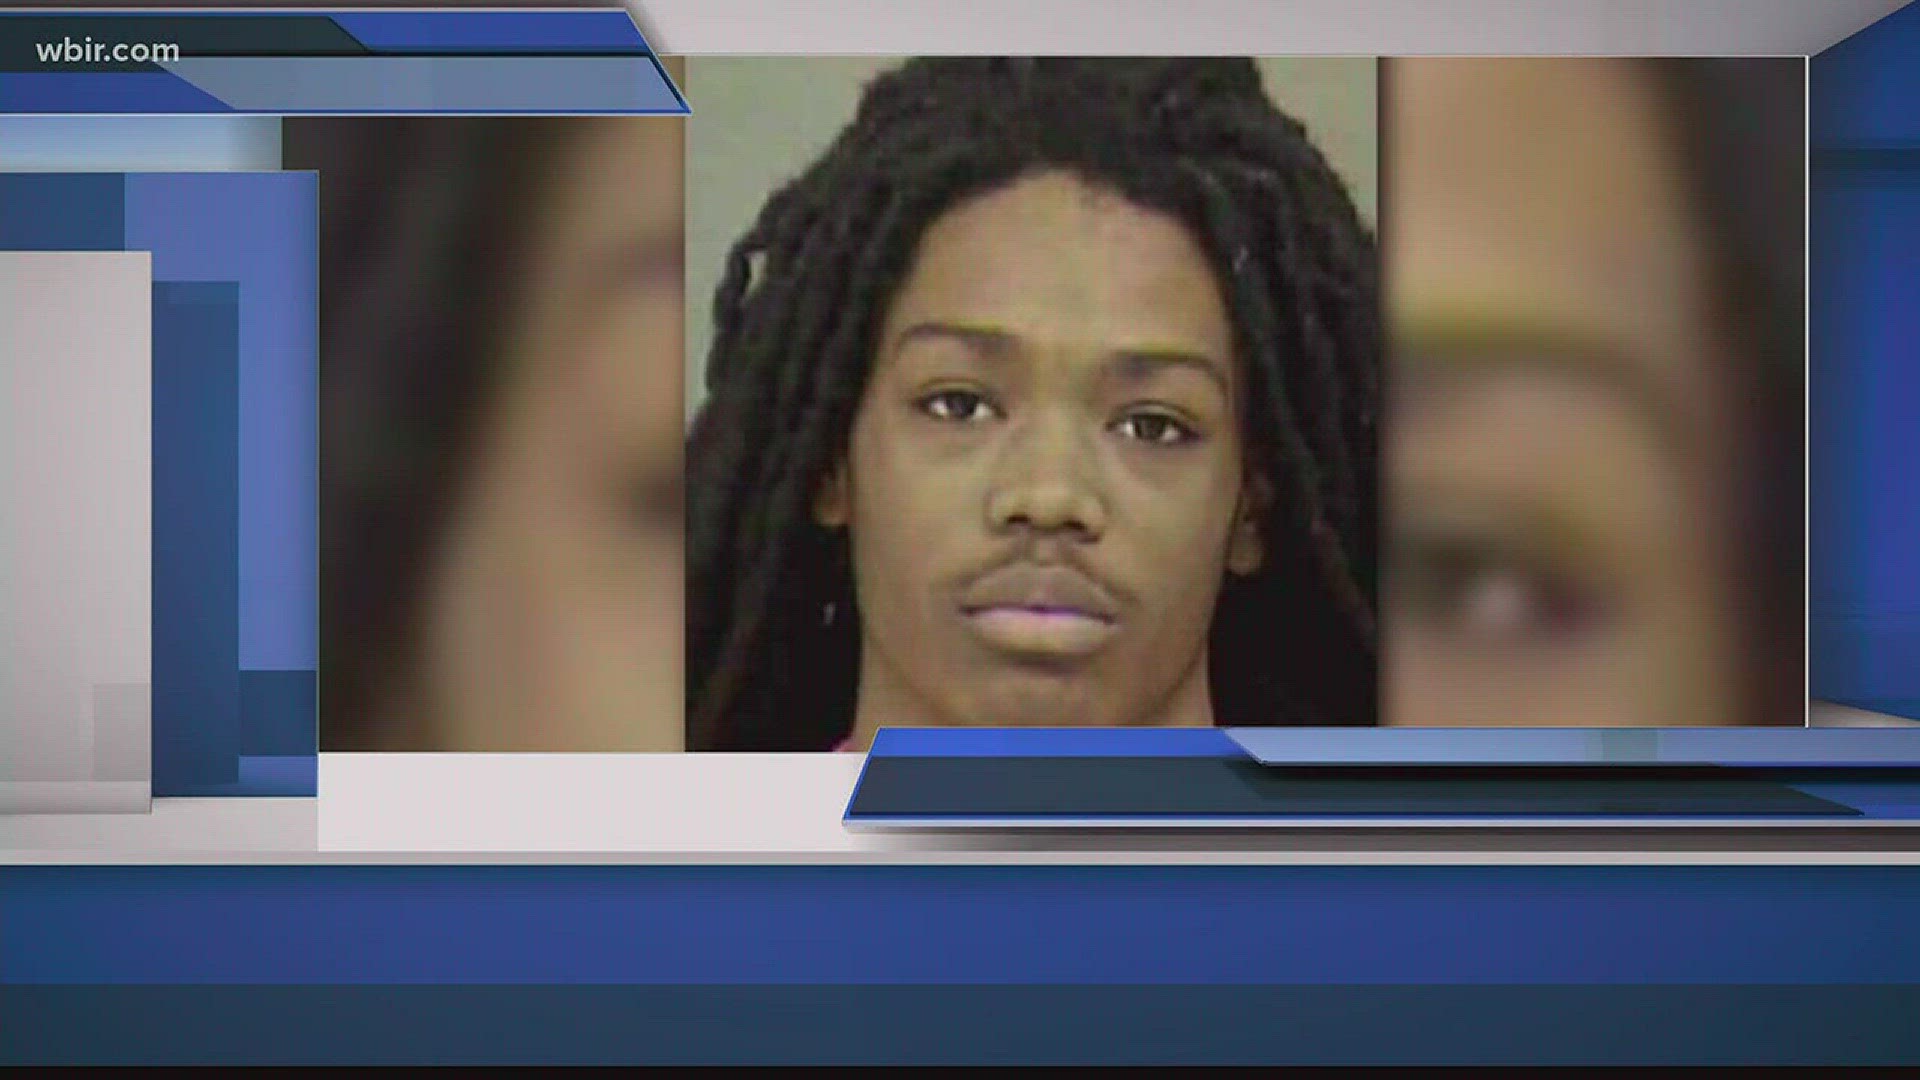 17-year-old Demonte McCain is charged with the murder of Kentucky baseball player Zachary Finch.